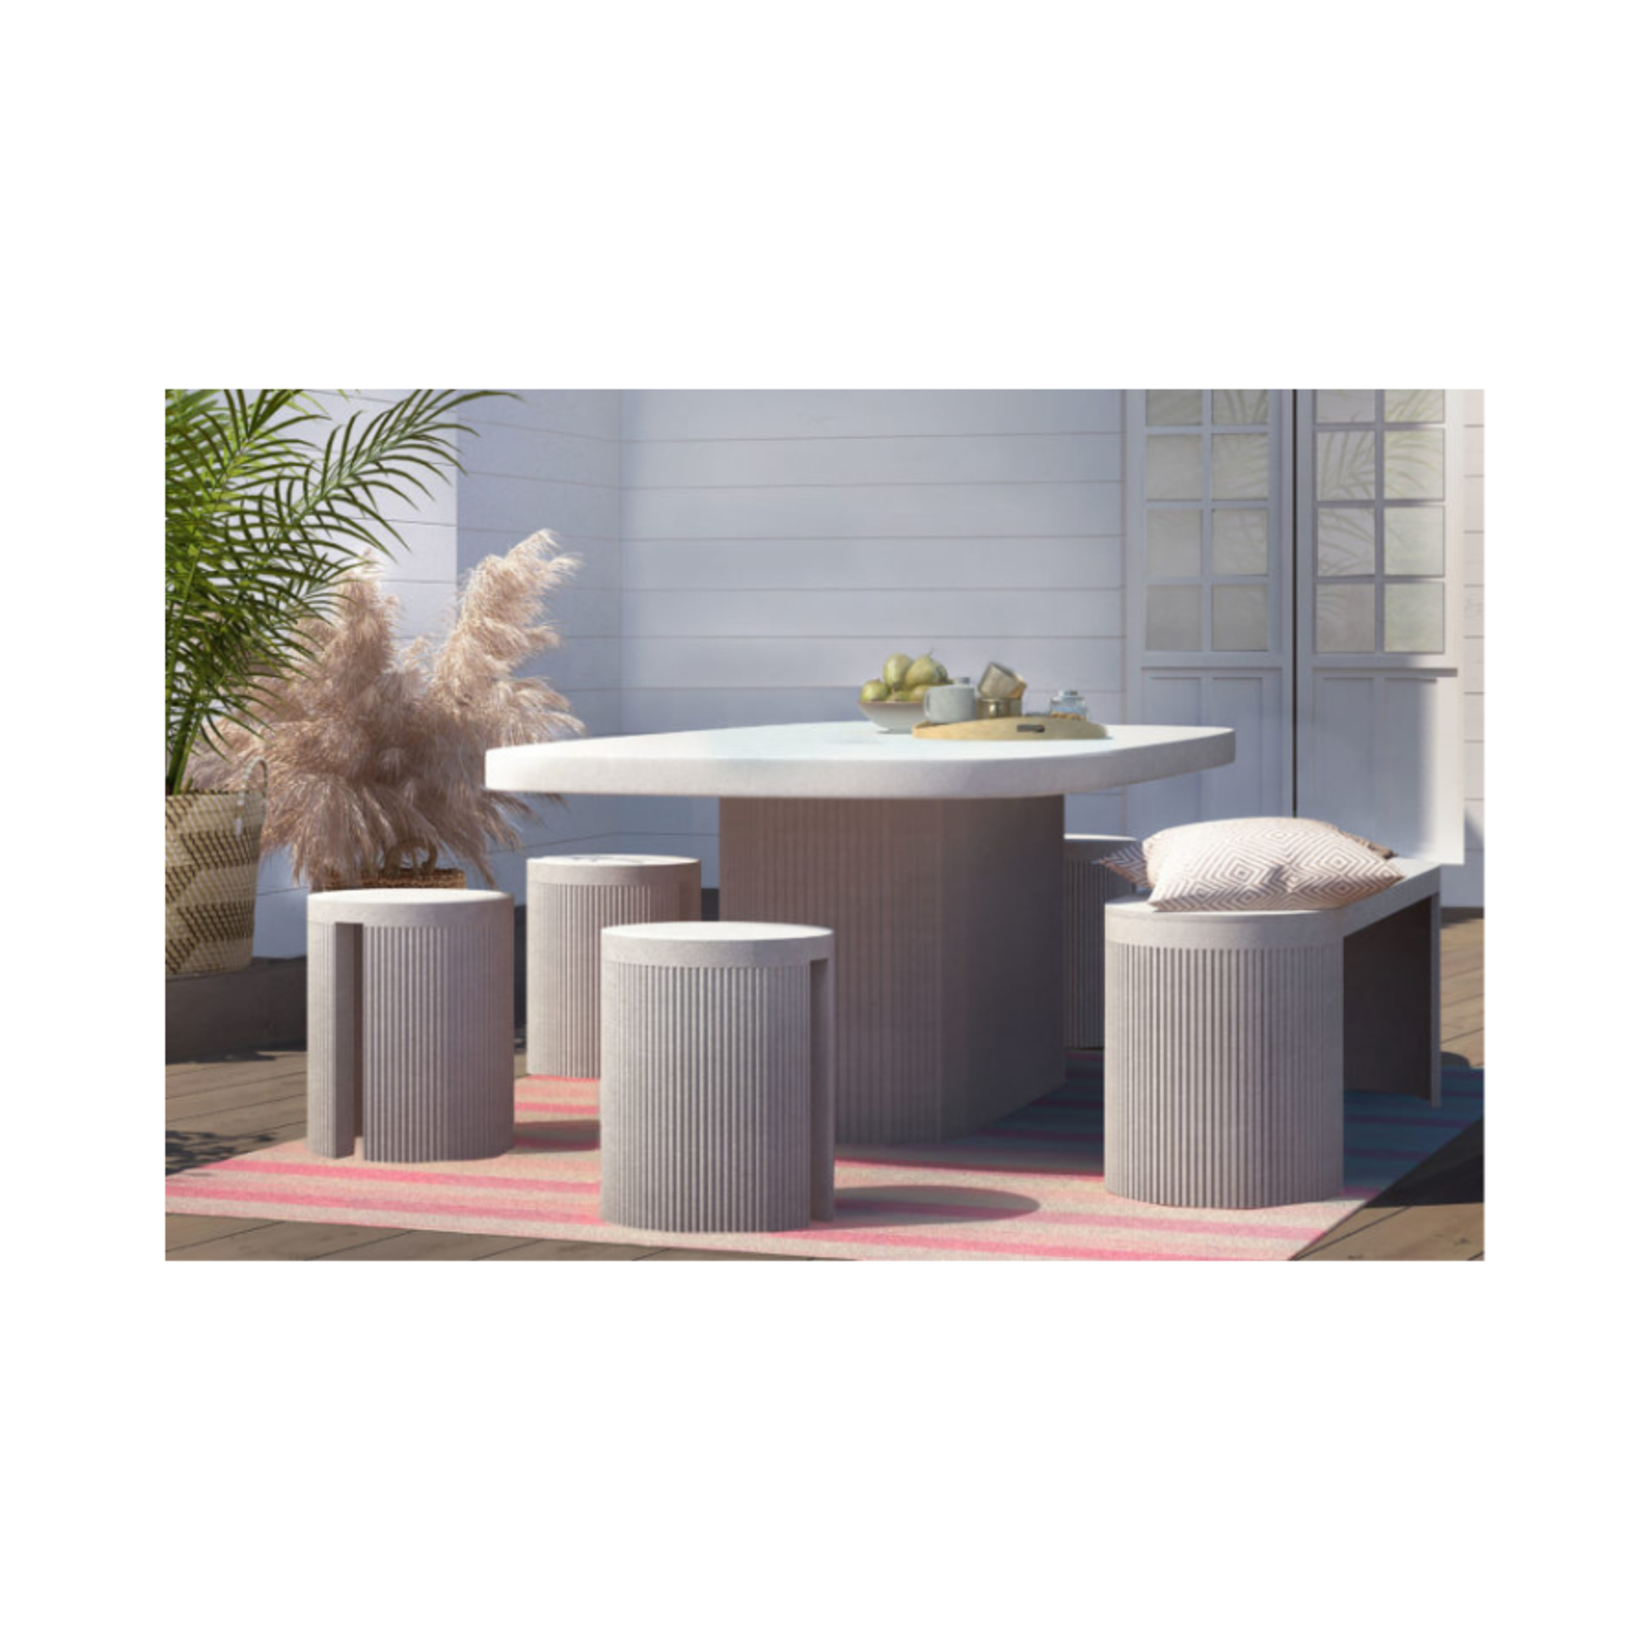 Tov Vienna Dining Table | Outdoor